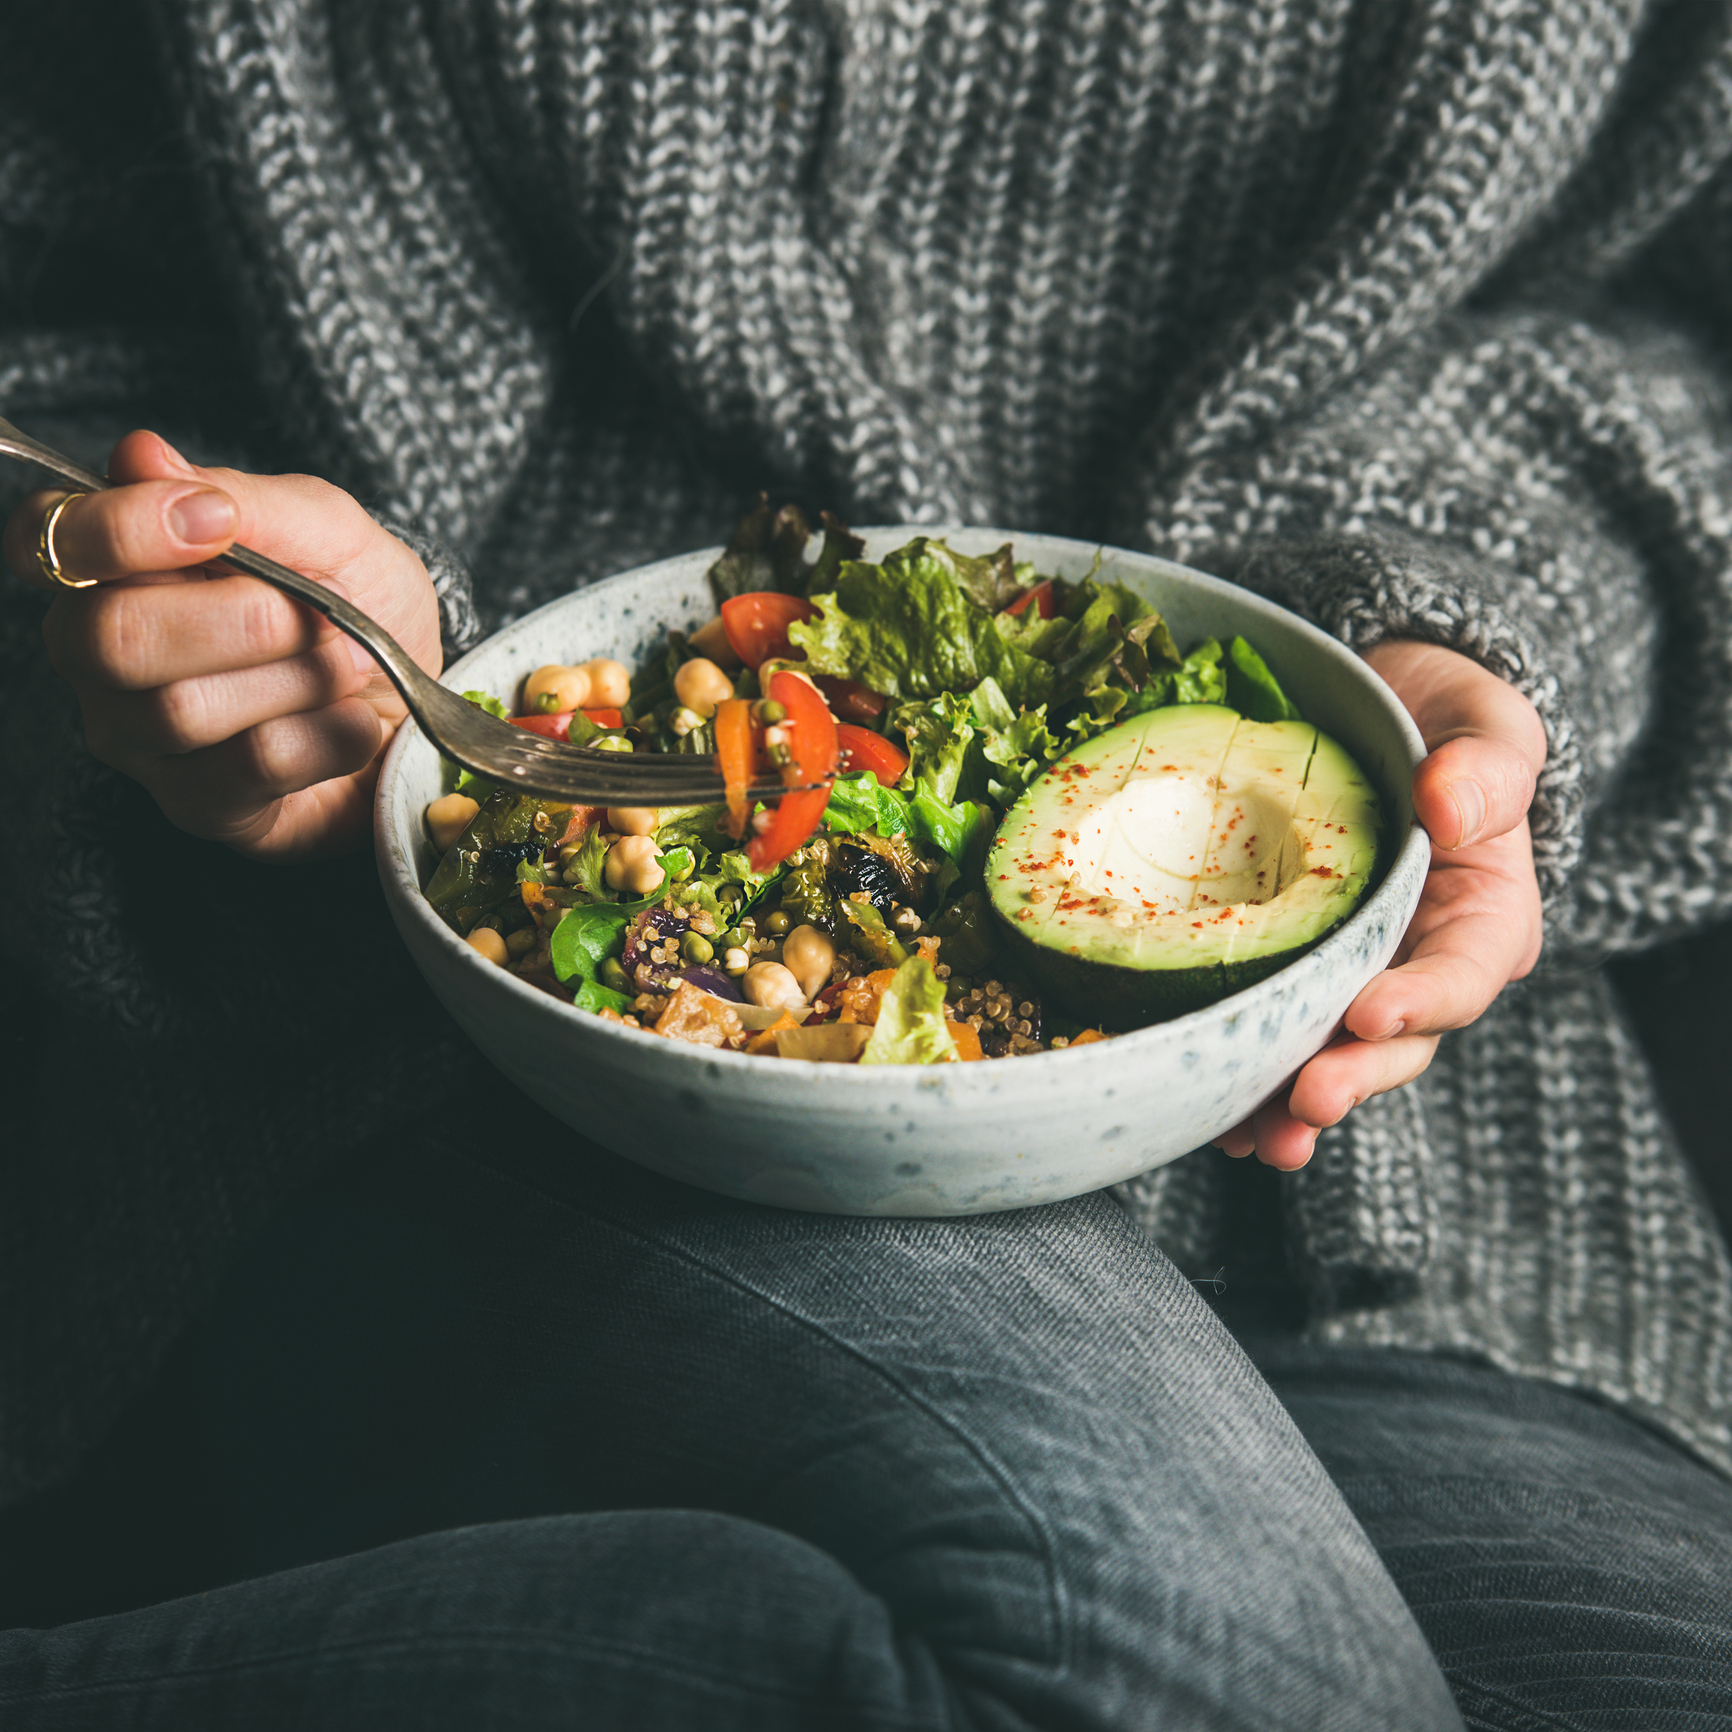 Woman holding a bowl of salad with sliced avocado on one side.